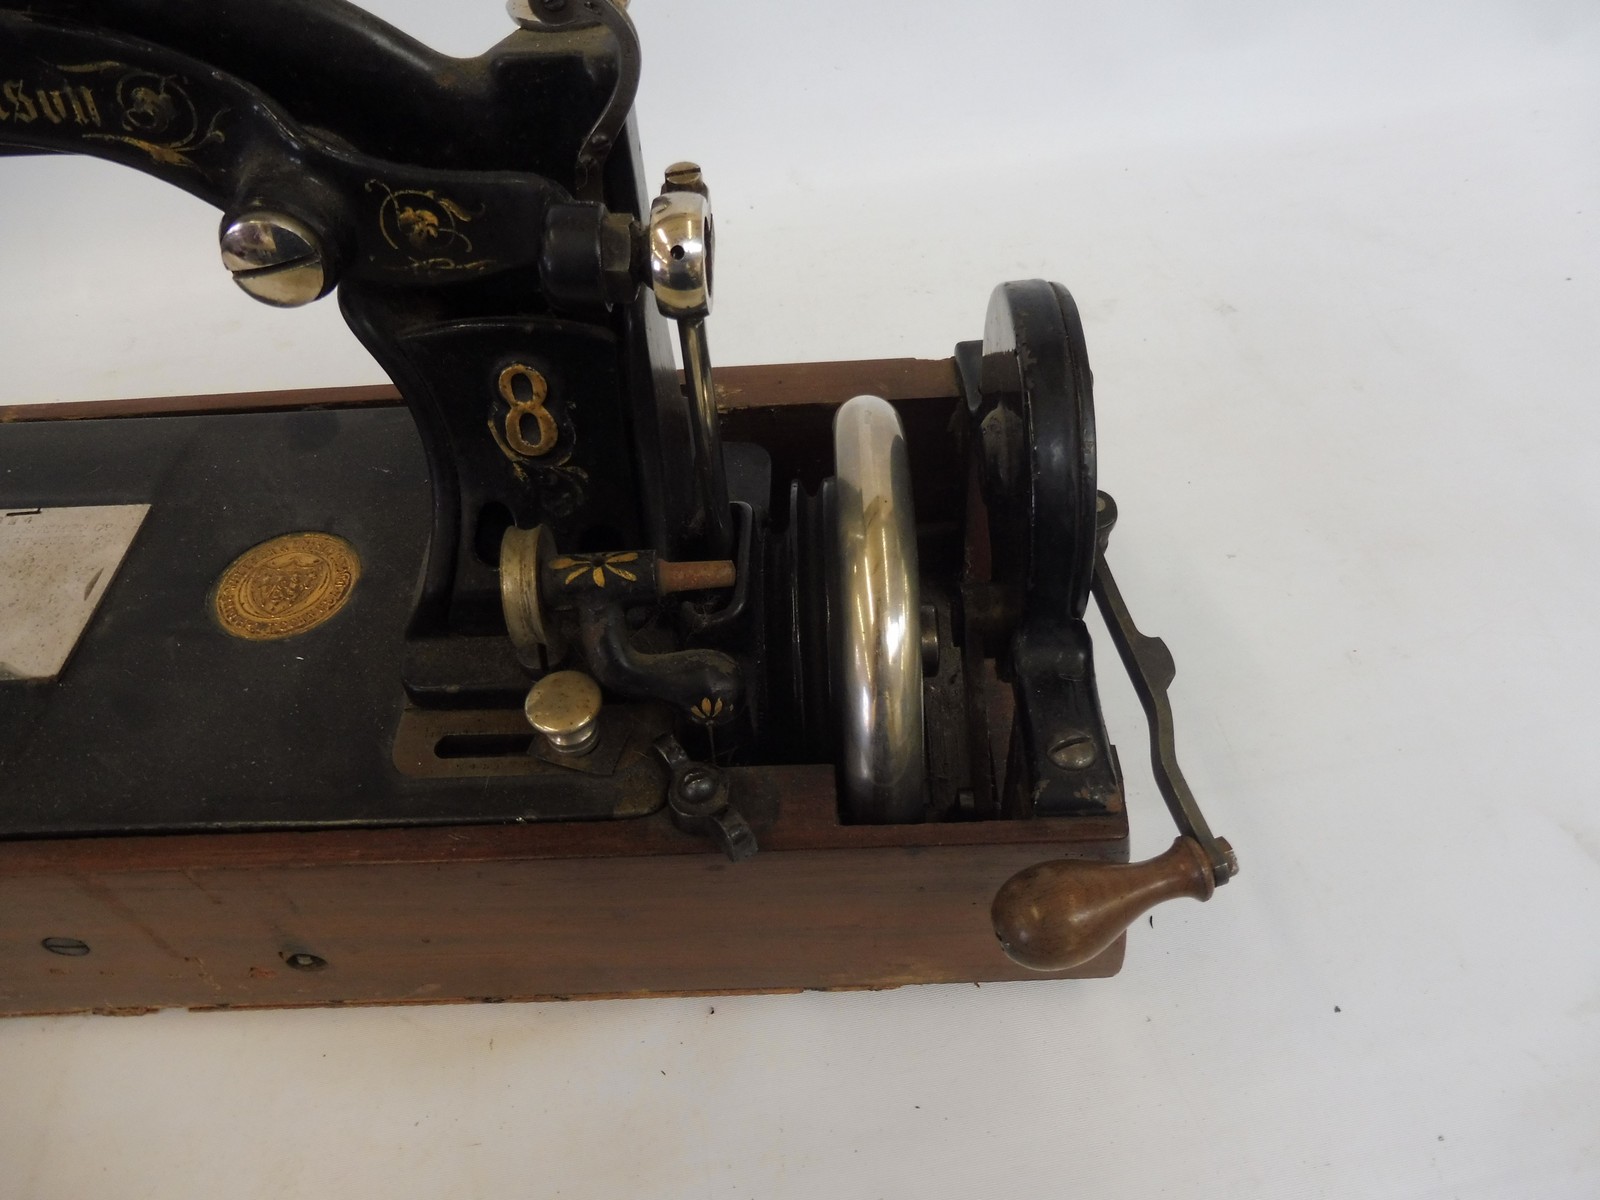 A Wheeler & Wilson of Bridgeport Conn. USA, no.8 sewing machine, in case. - Image 7 of 9